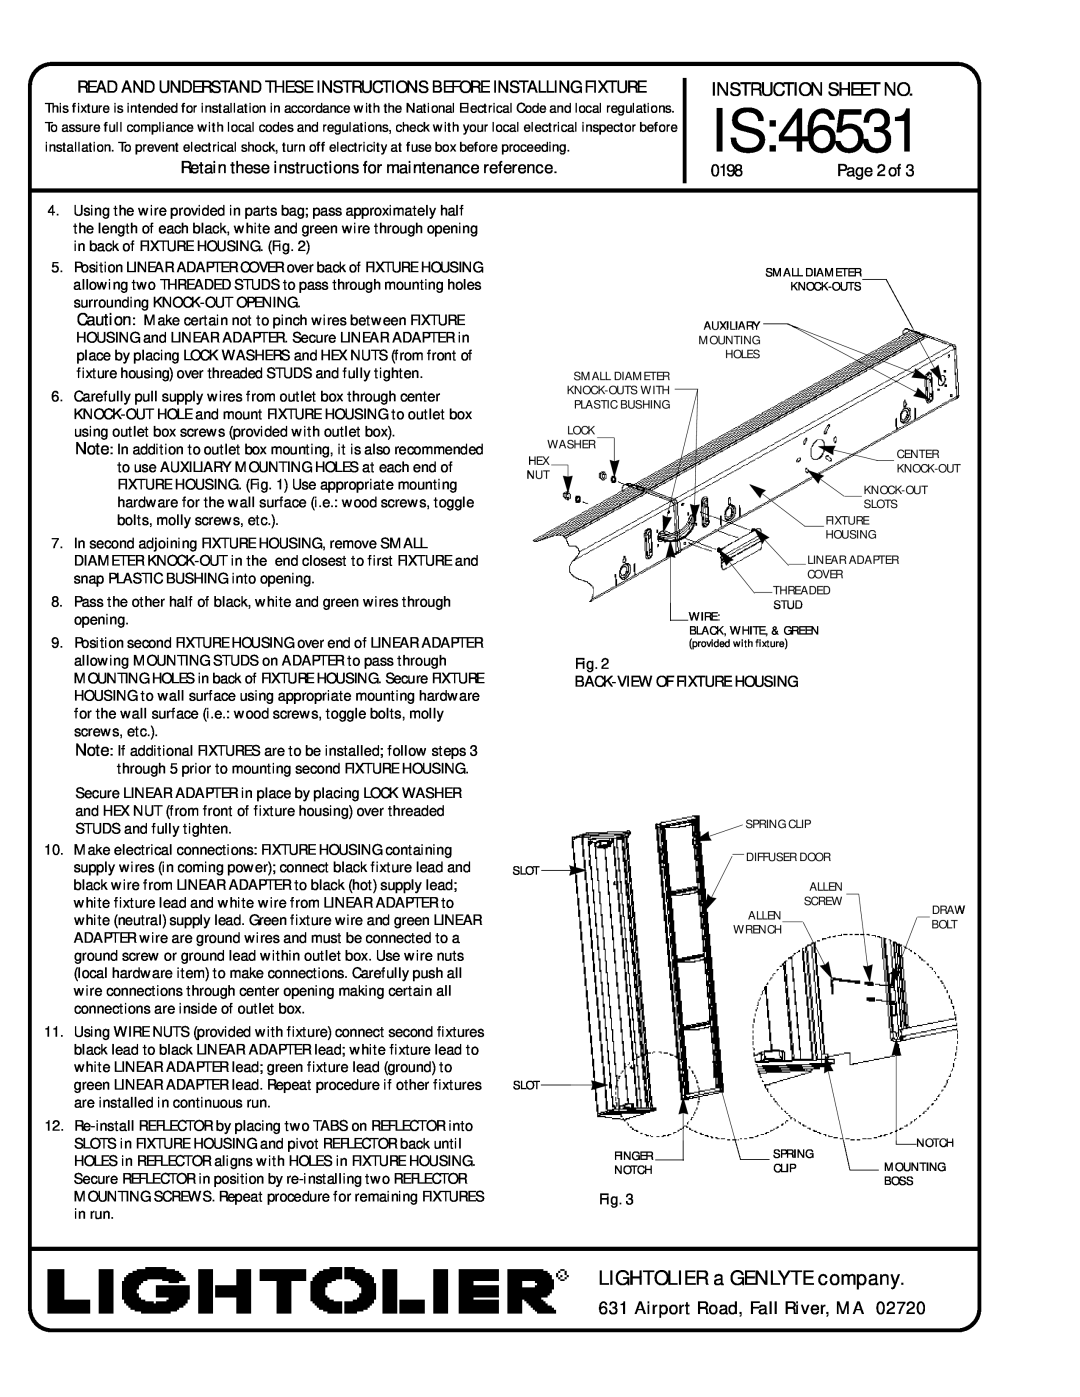 Lightolier IS:46531 instruction sheet Is, LIGHTOLIER a GENLYTE company, Airport Road, Fall River, MA, Instruction Sheet No 